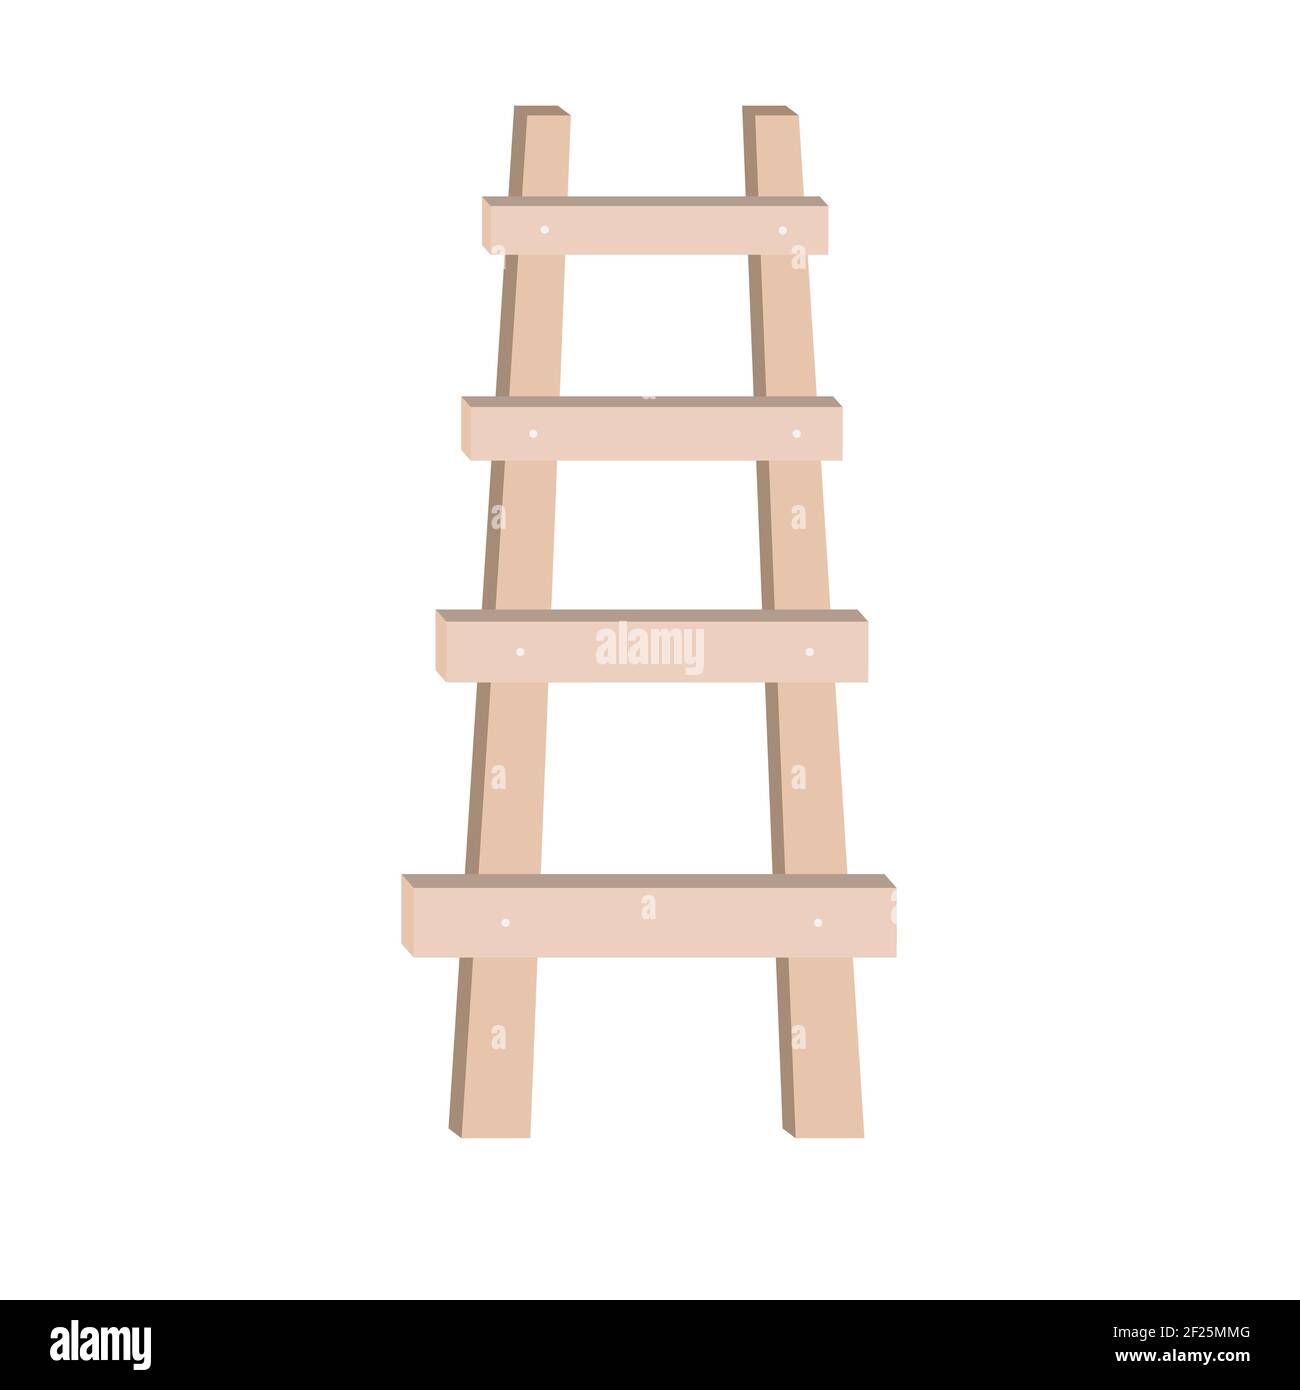 Vector illustration of wooden ladder. Design element for kids backgrounds, interiors or garden decor in natural and Scandinavian style Stock Vector